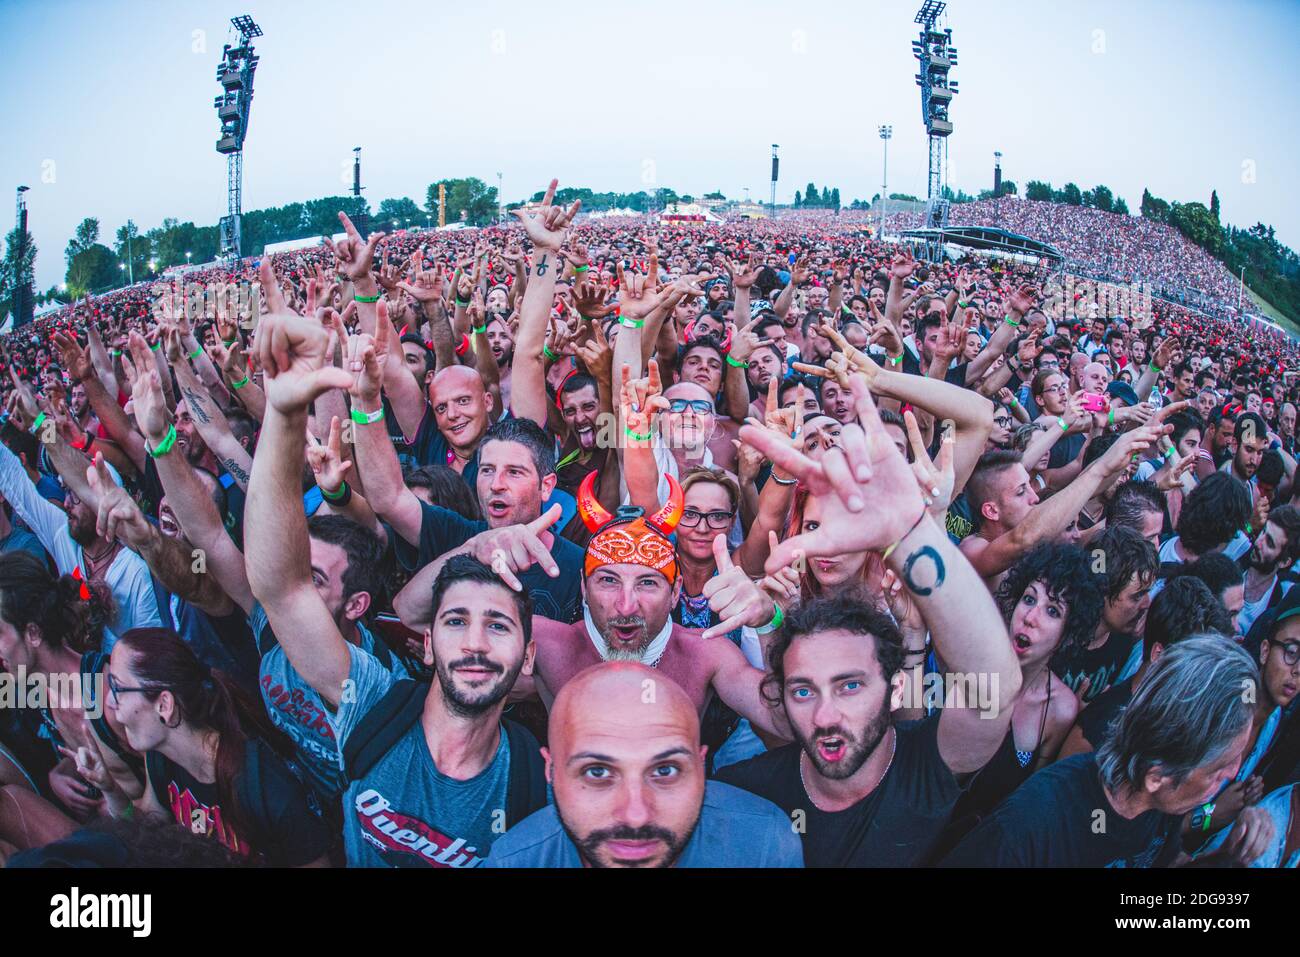 Fans of the australian rock band AC/DC, enjoying the “Rock or Bust World Tour” concert at the Autodromo Enzo e Dino of Italy Stock Photo - Alamy